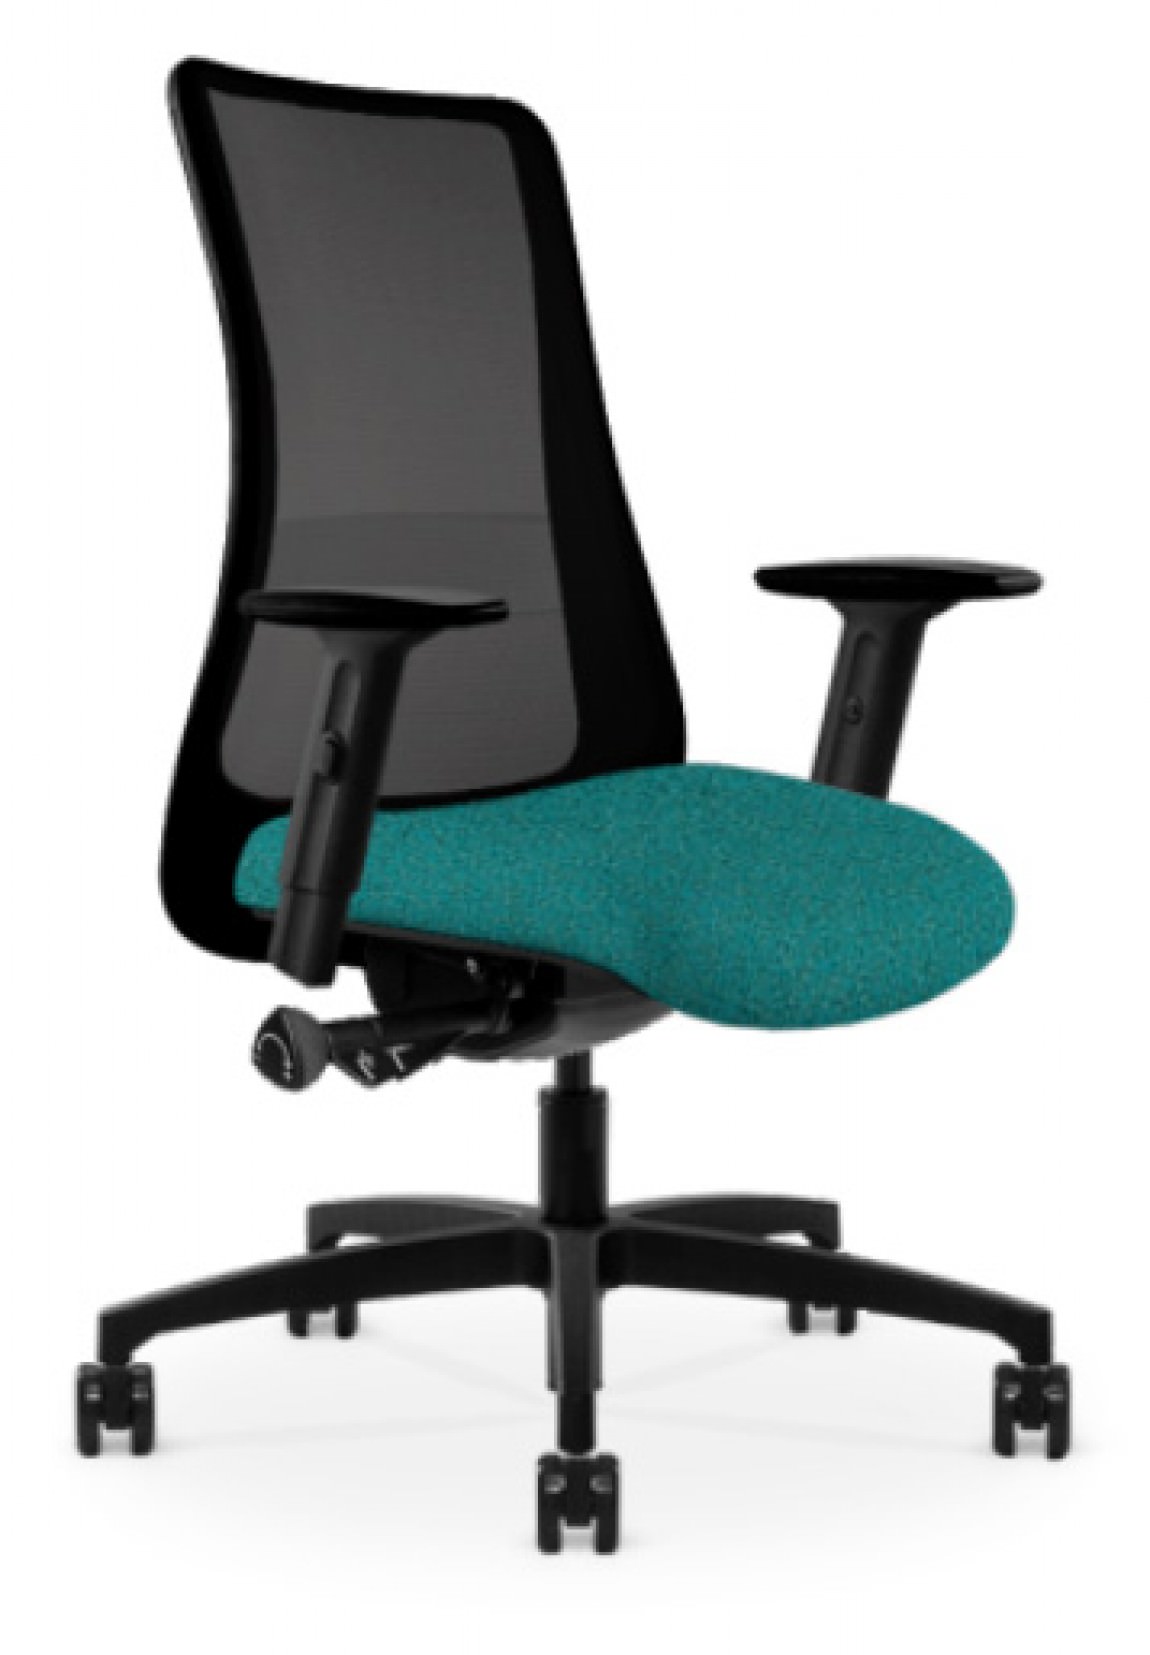 Black Copper Mesh Antimicrobial Office Chair w/ Tropical Blue Seat